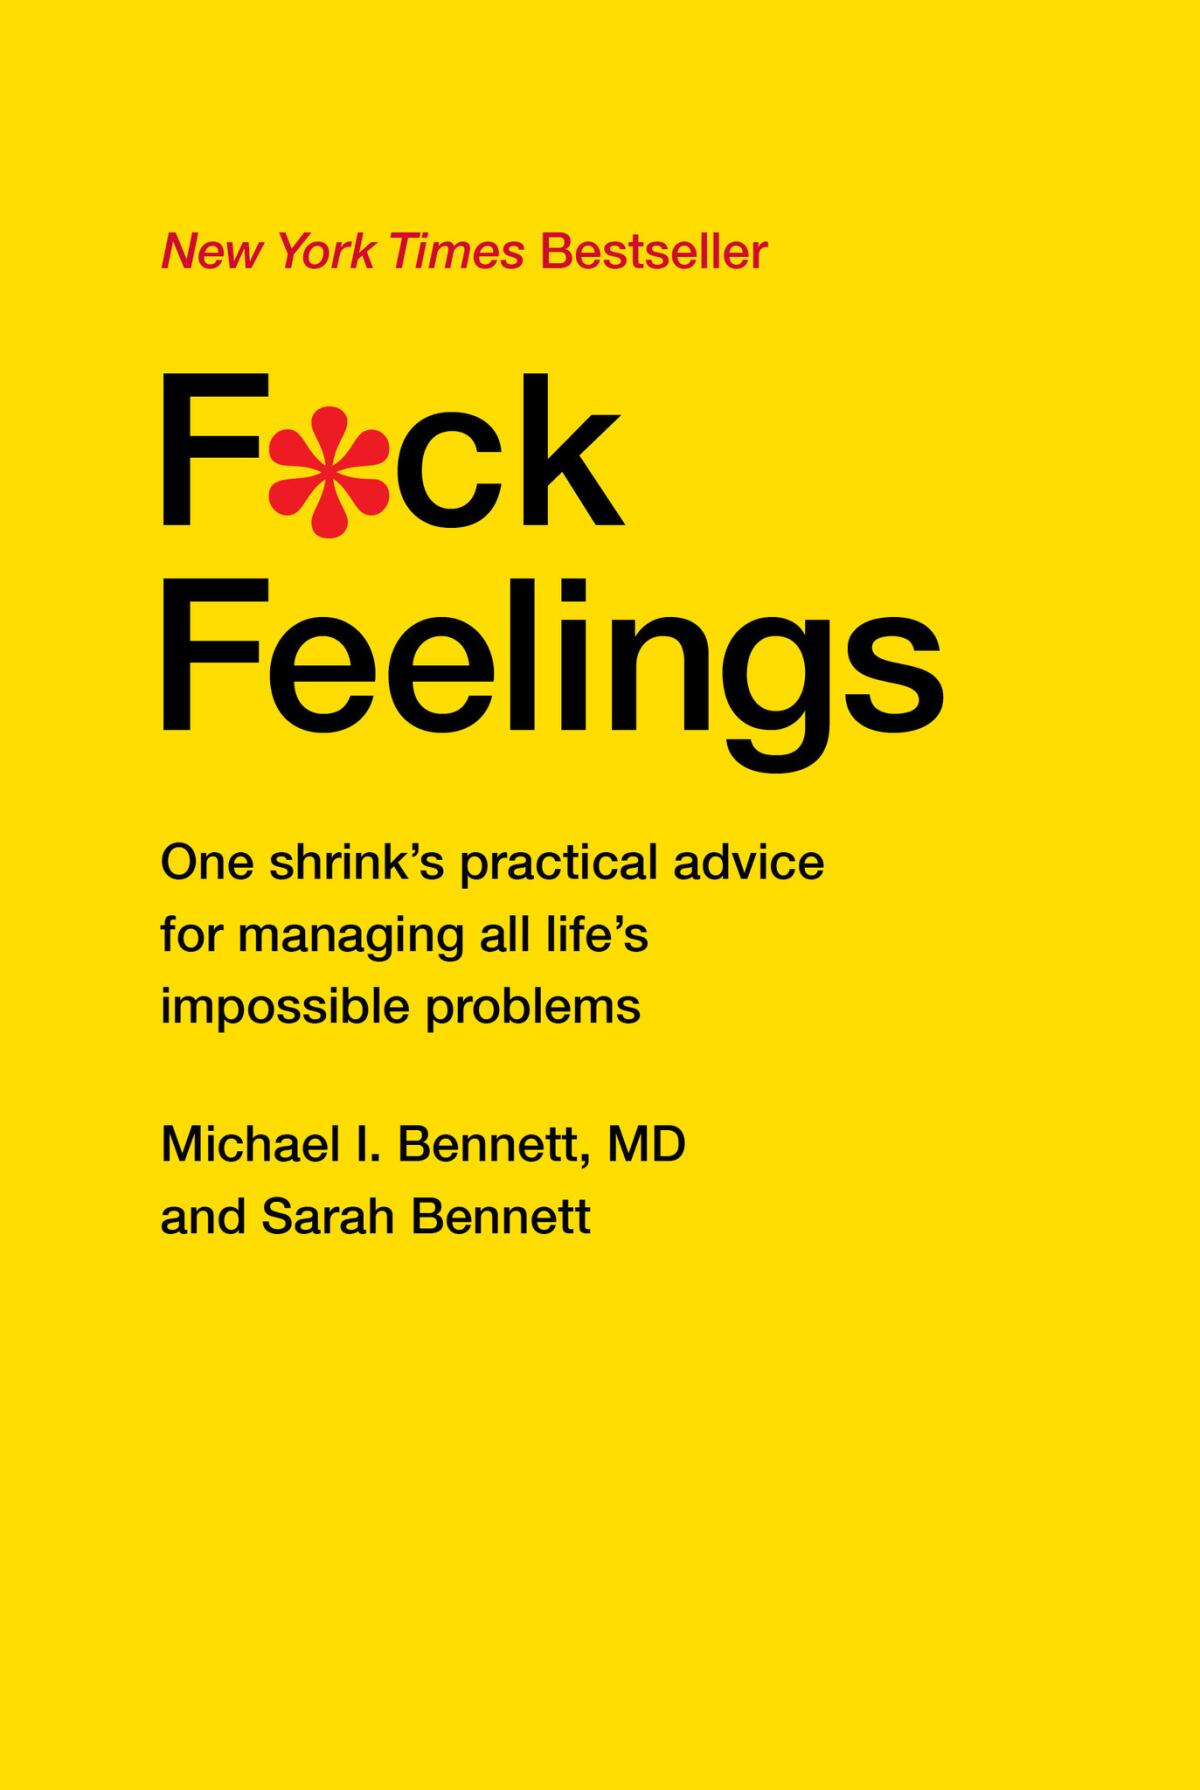 "F*ck Feelings: One Shrink’s Practical Advice for Managing All Life’s Impossible Problems" by Michael I. Bennett, MD and Sarah Bennett